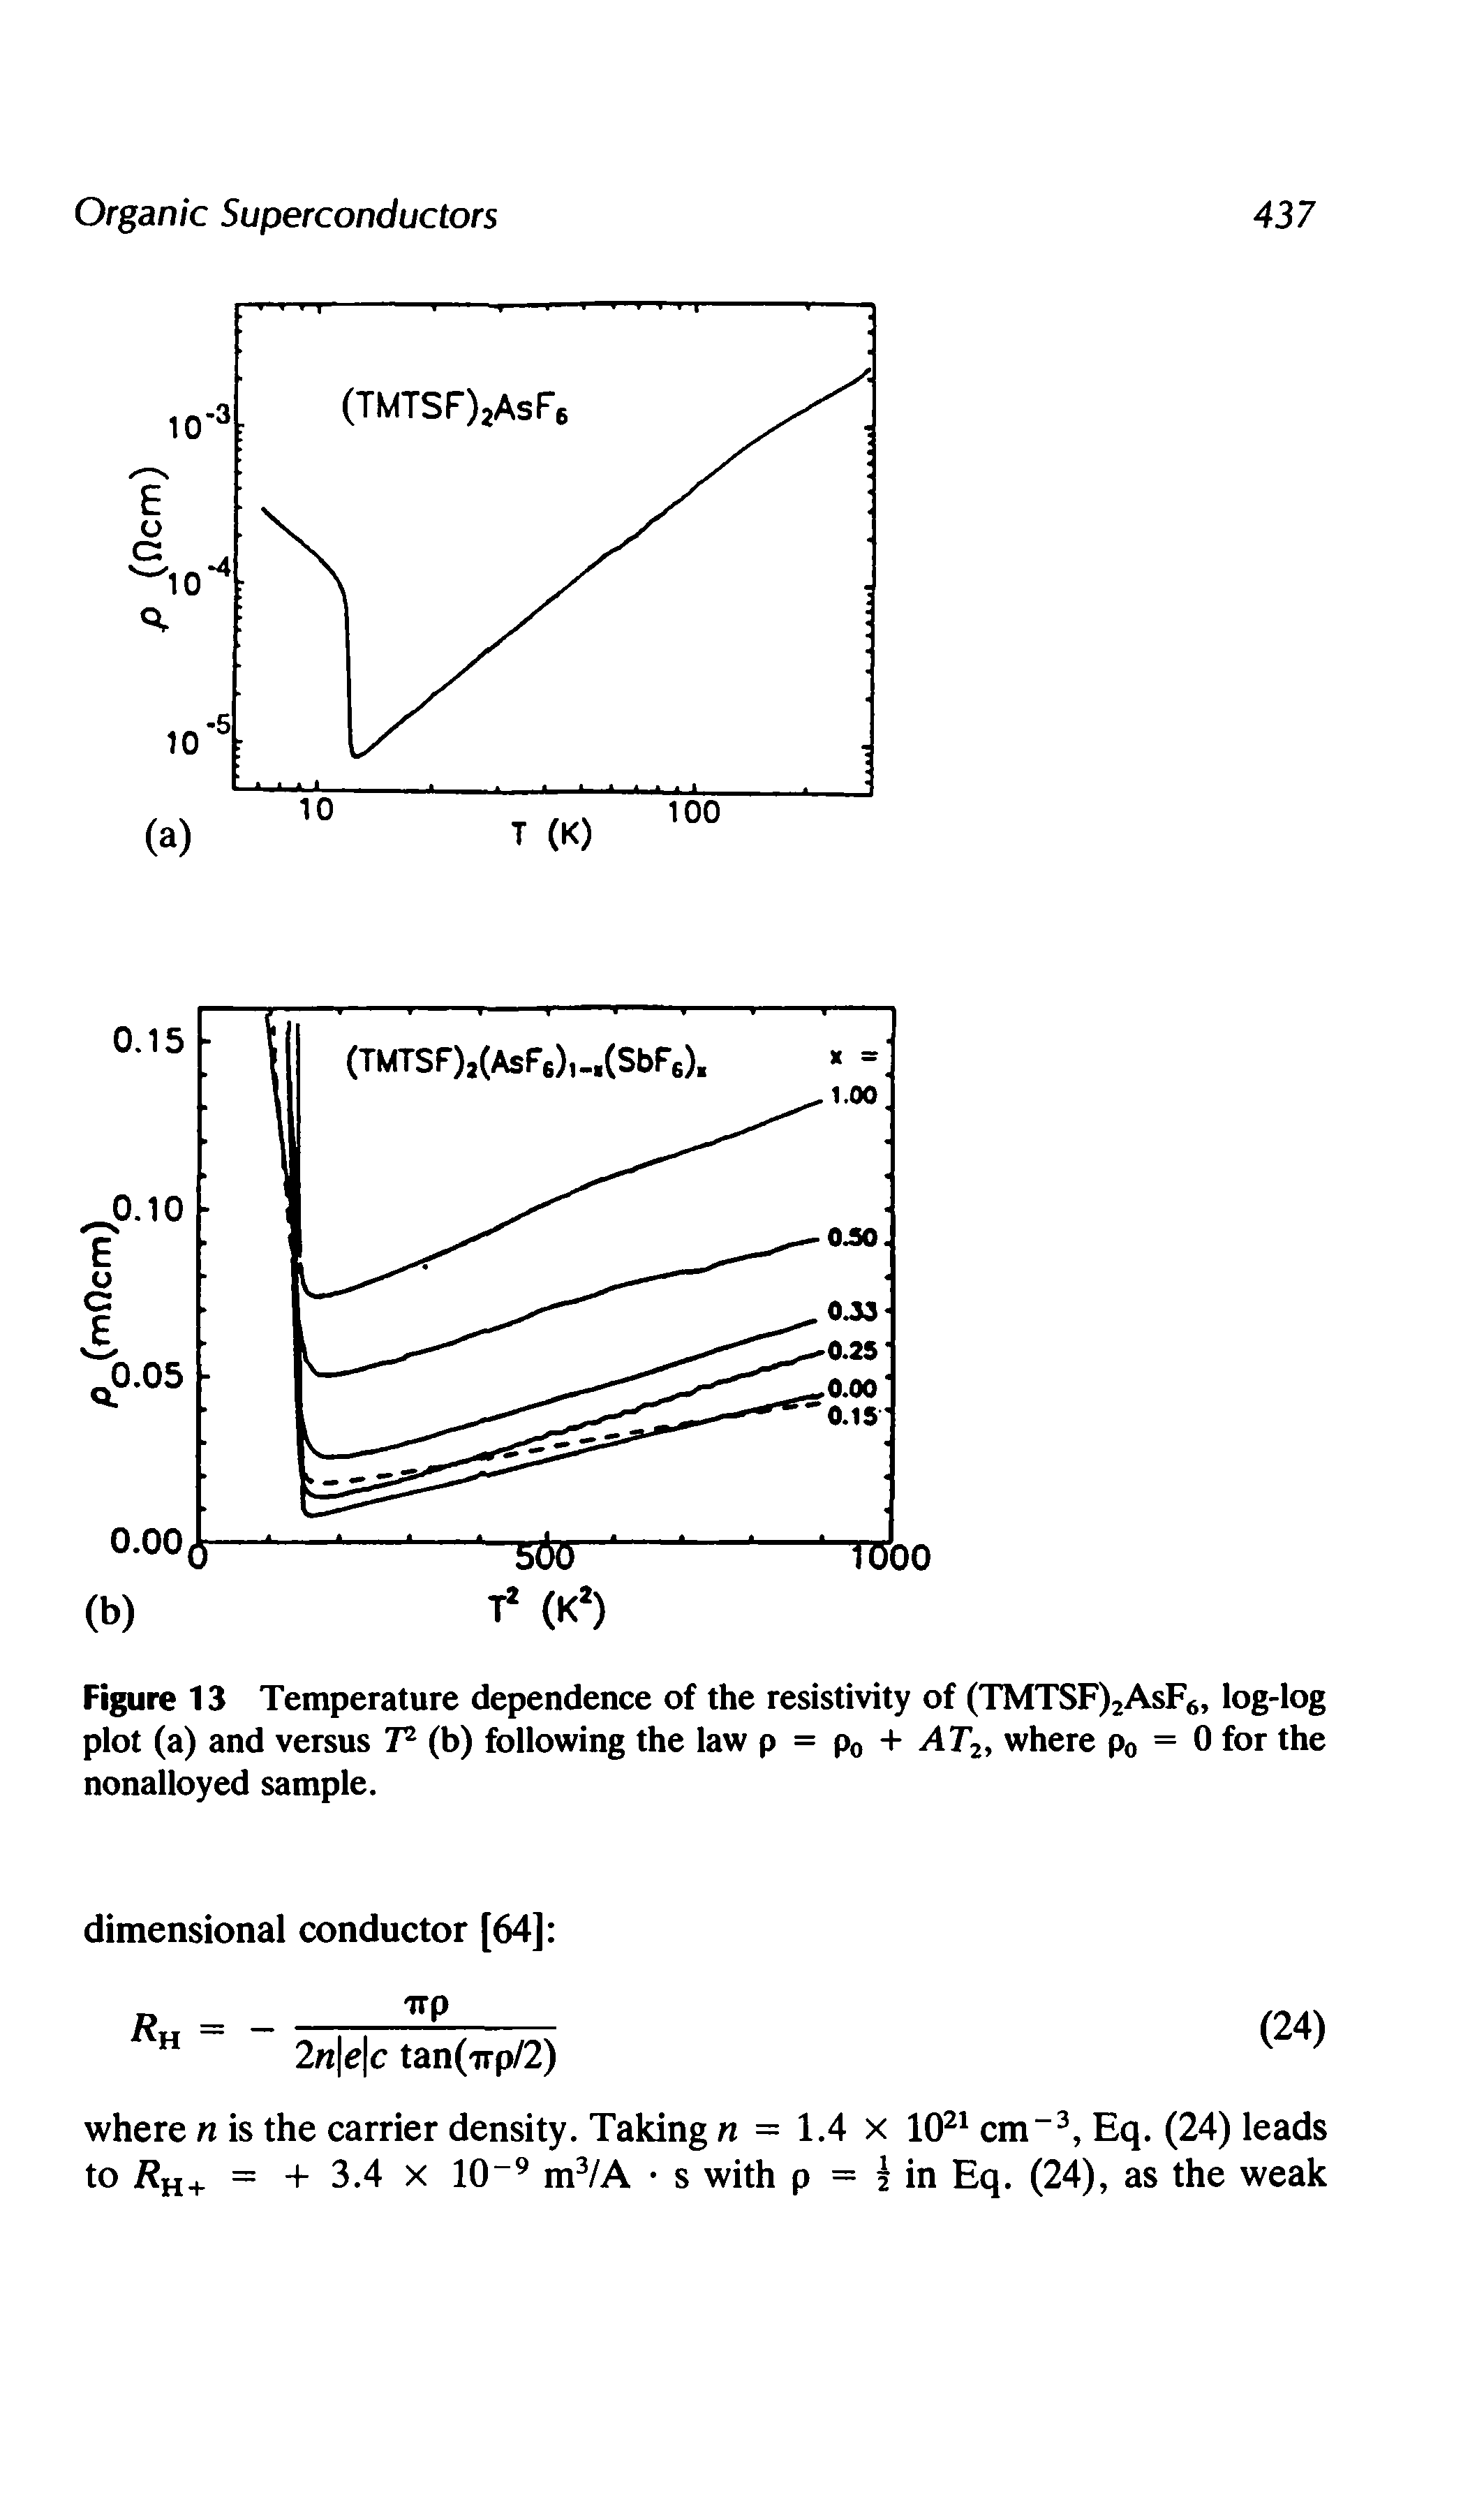 Figure 13 Temperature dependence of the resistivity of (TMTSF)2AsF6, log-log plot (a) and versus T2 (b) following the law p = p0 + AT2, where p0 = 0 for the nonalloyed sample.